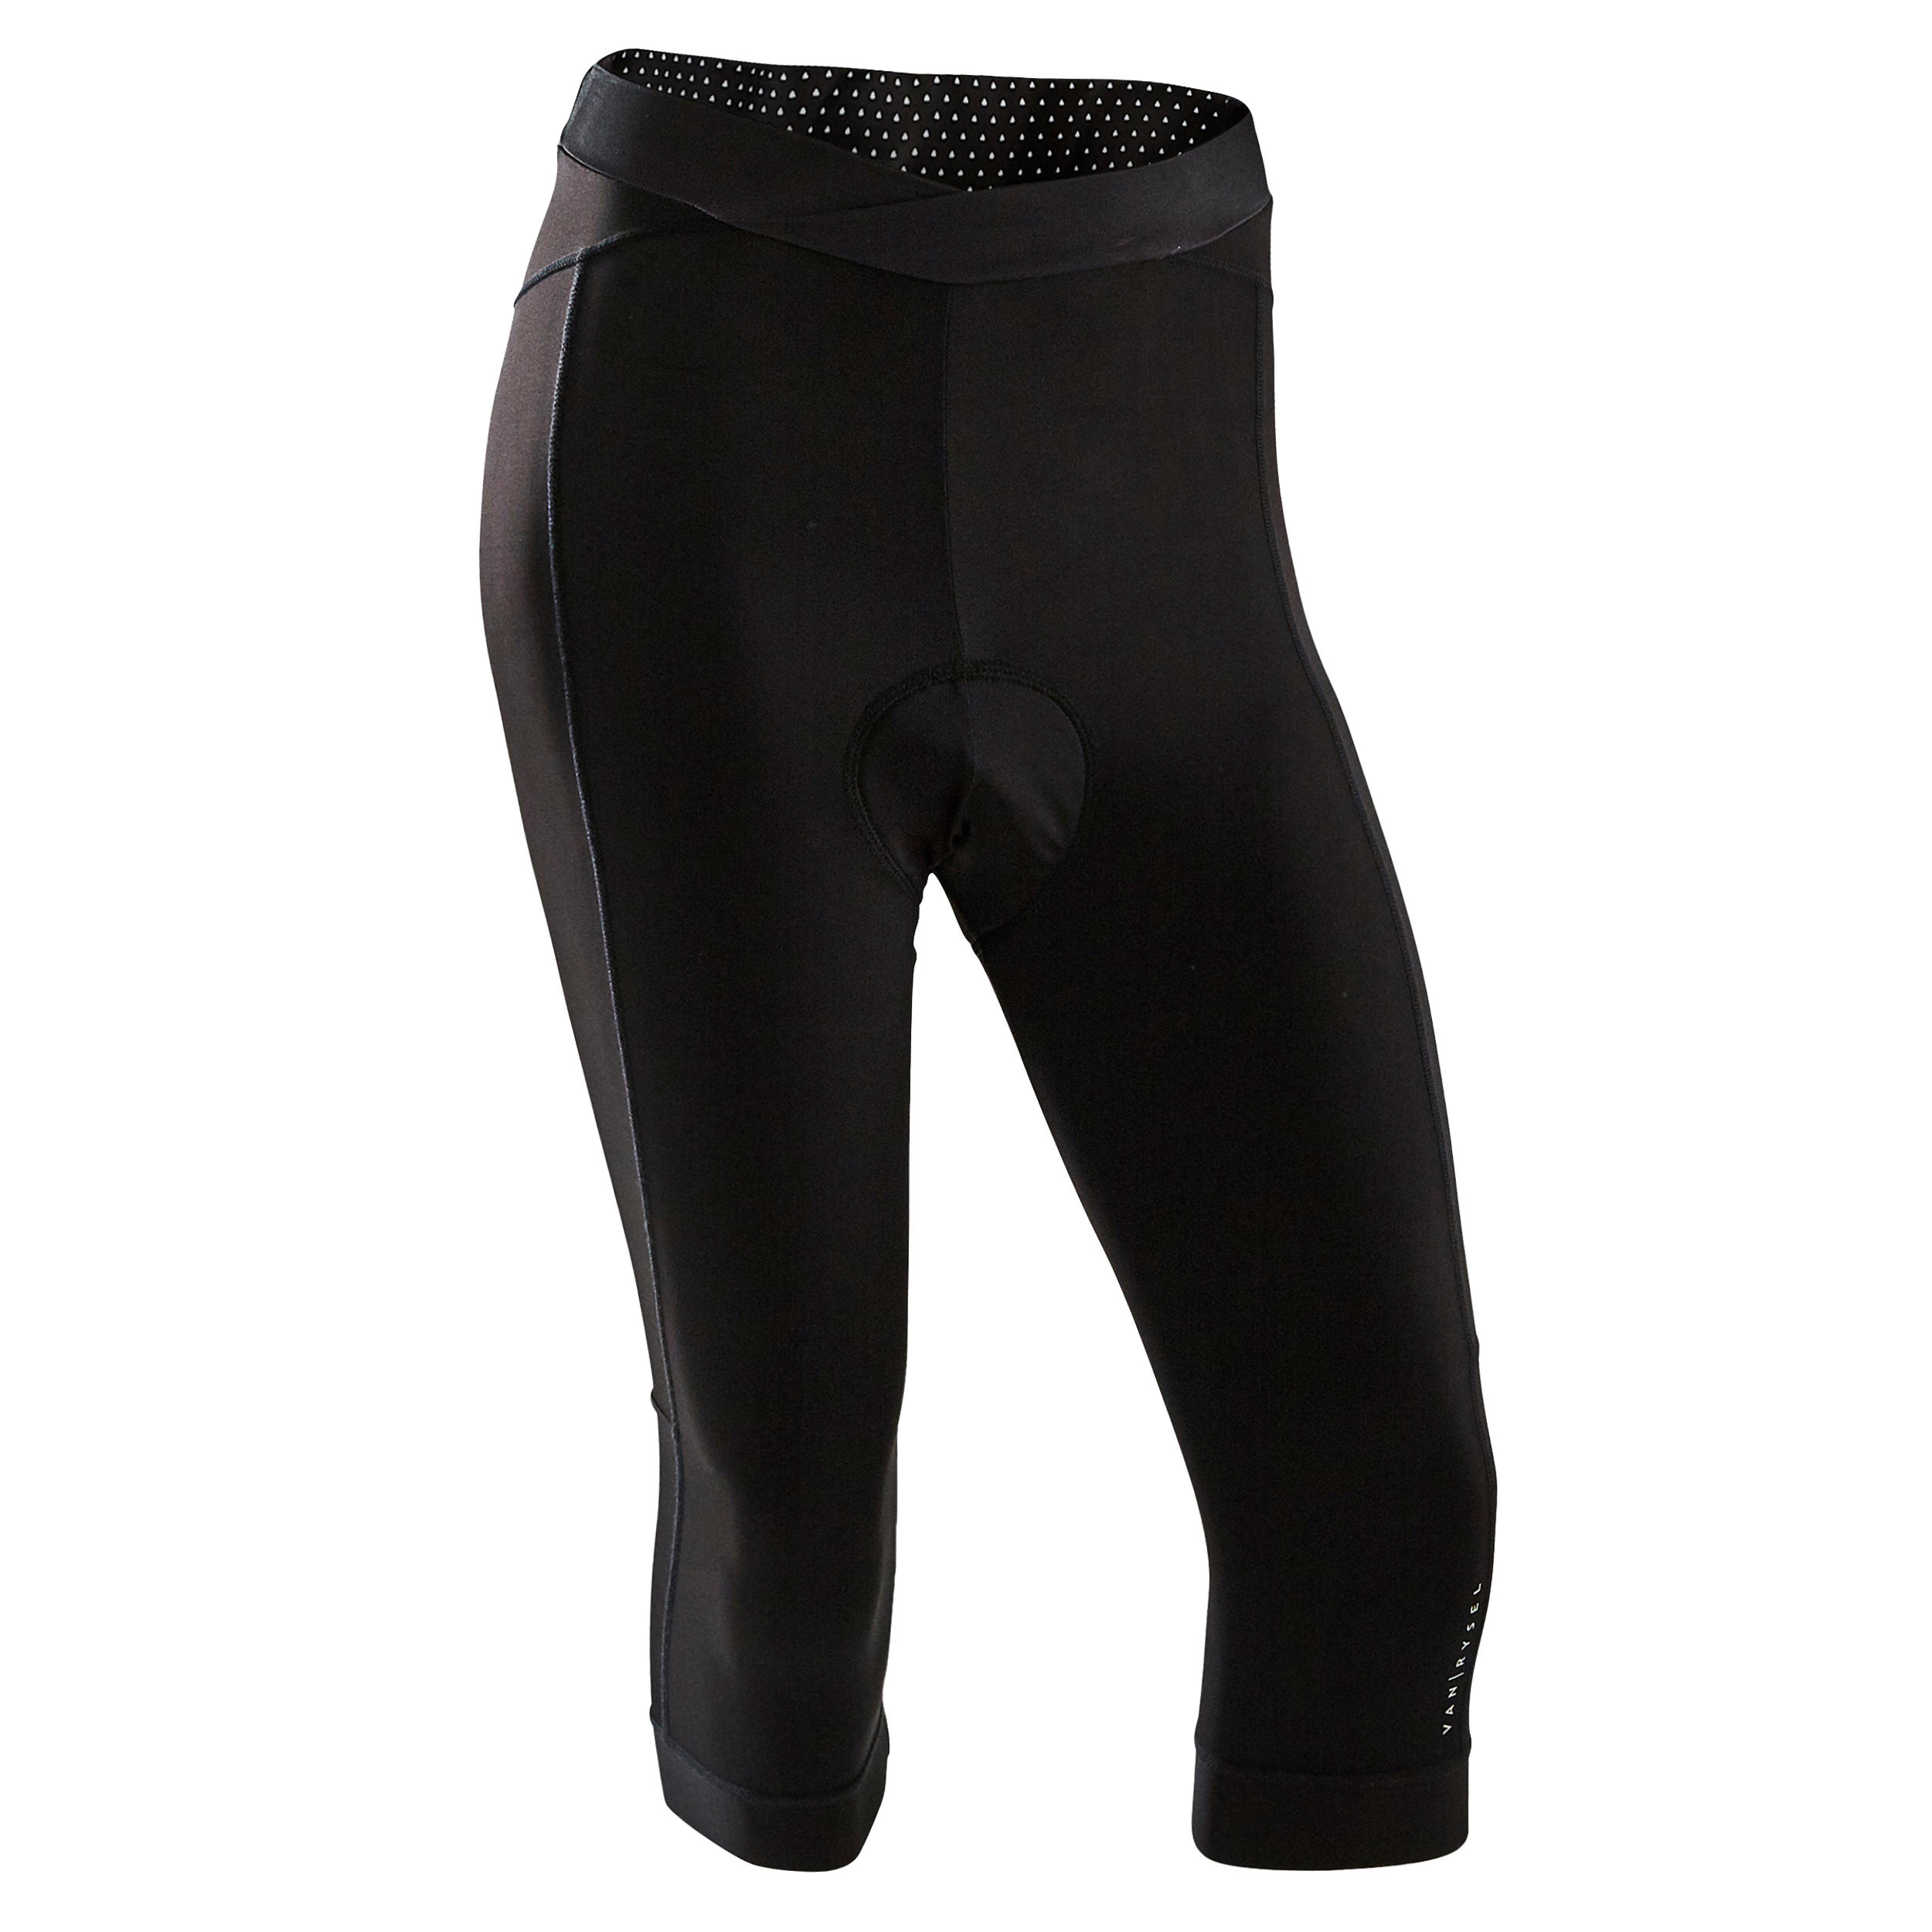 900 Women's Cropped Bibless Cycling Tights - Black 1/4